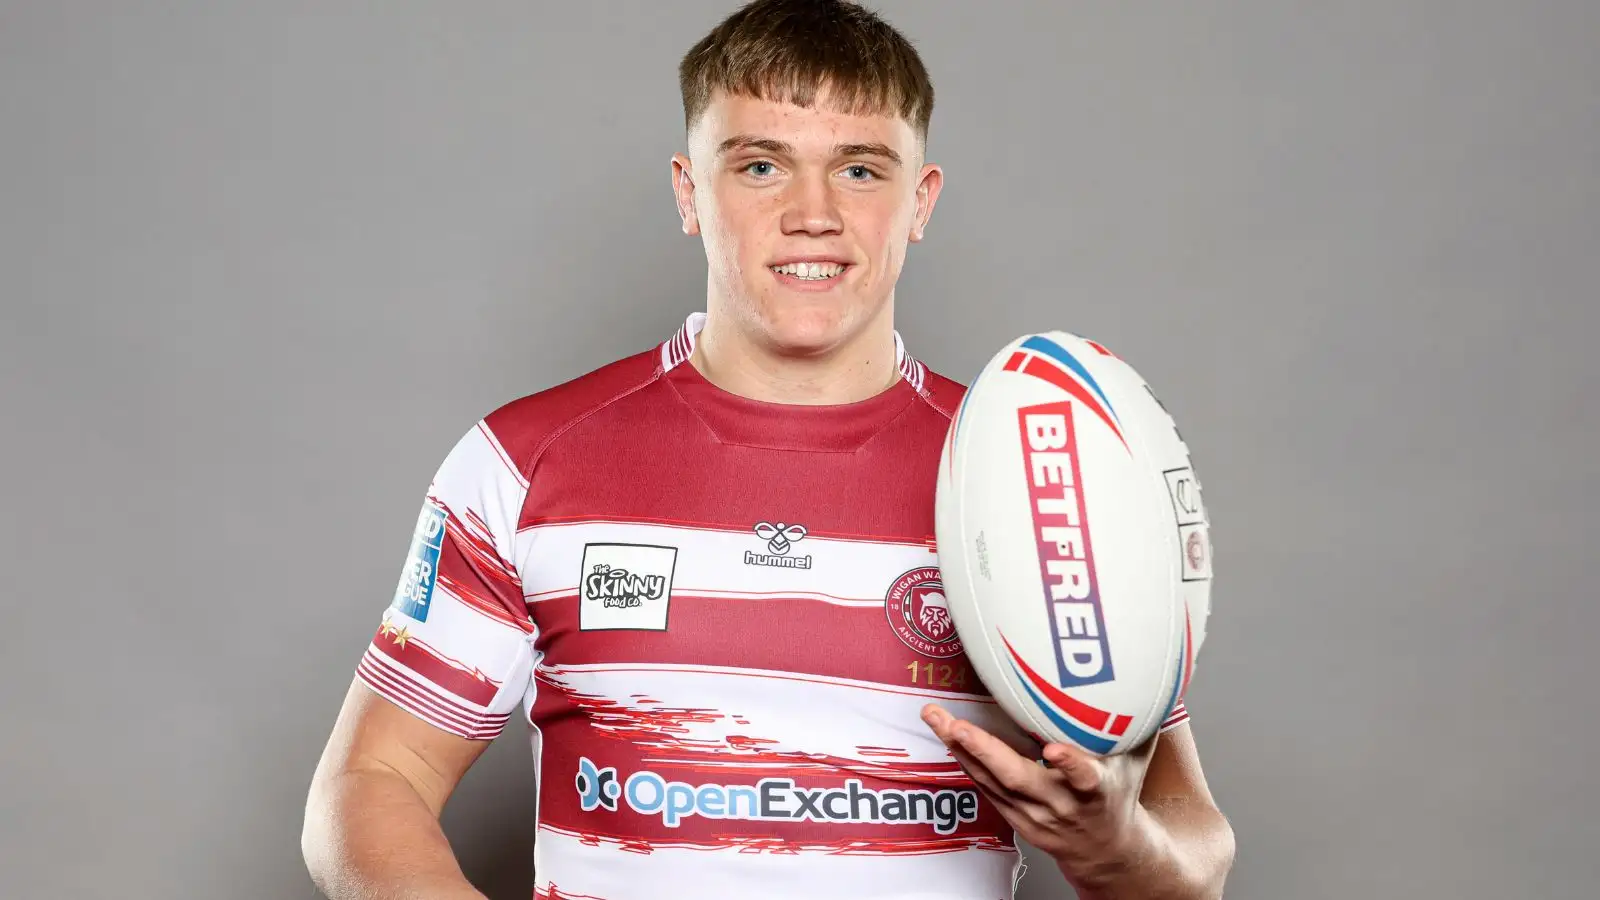 Wigan forward recalled from Championship loan spell